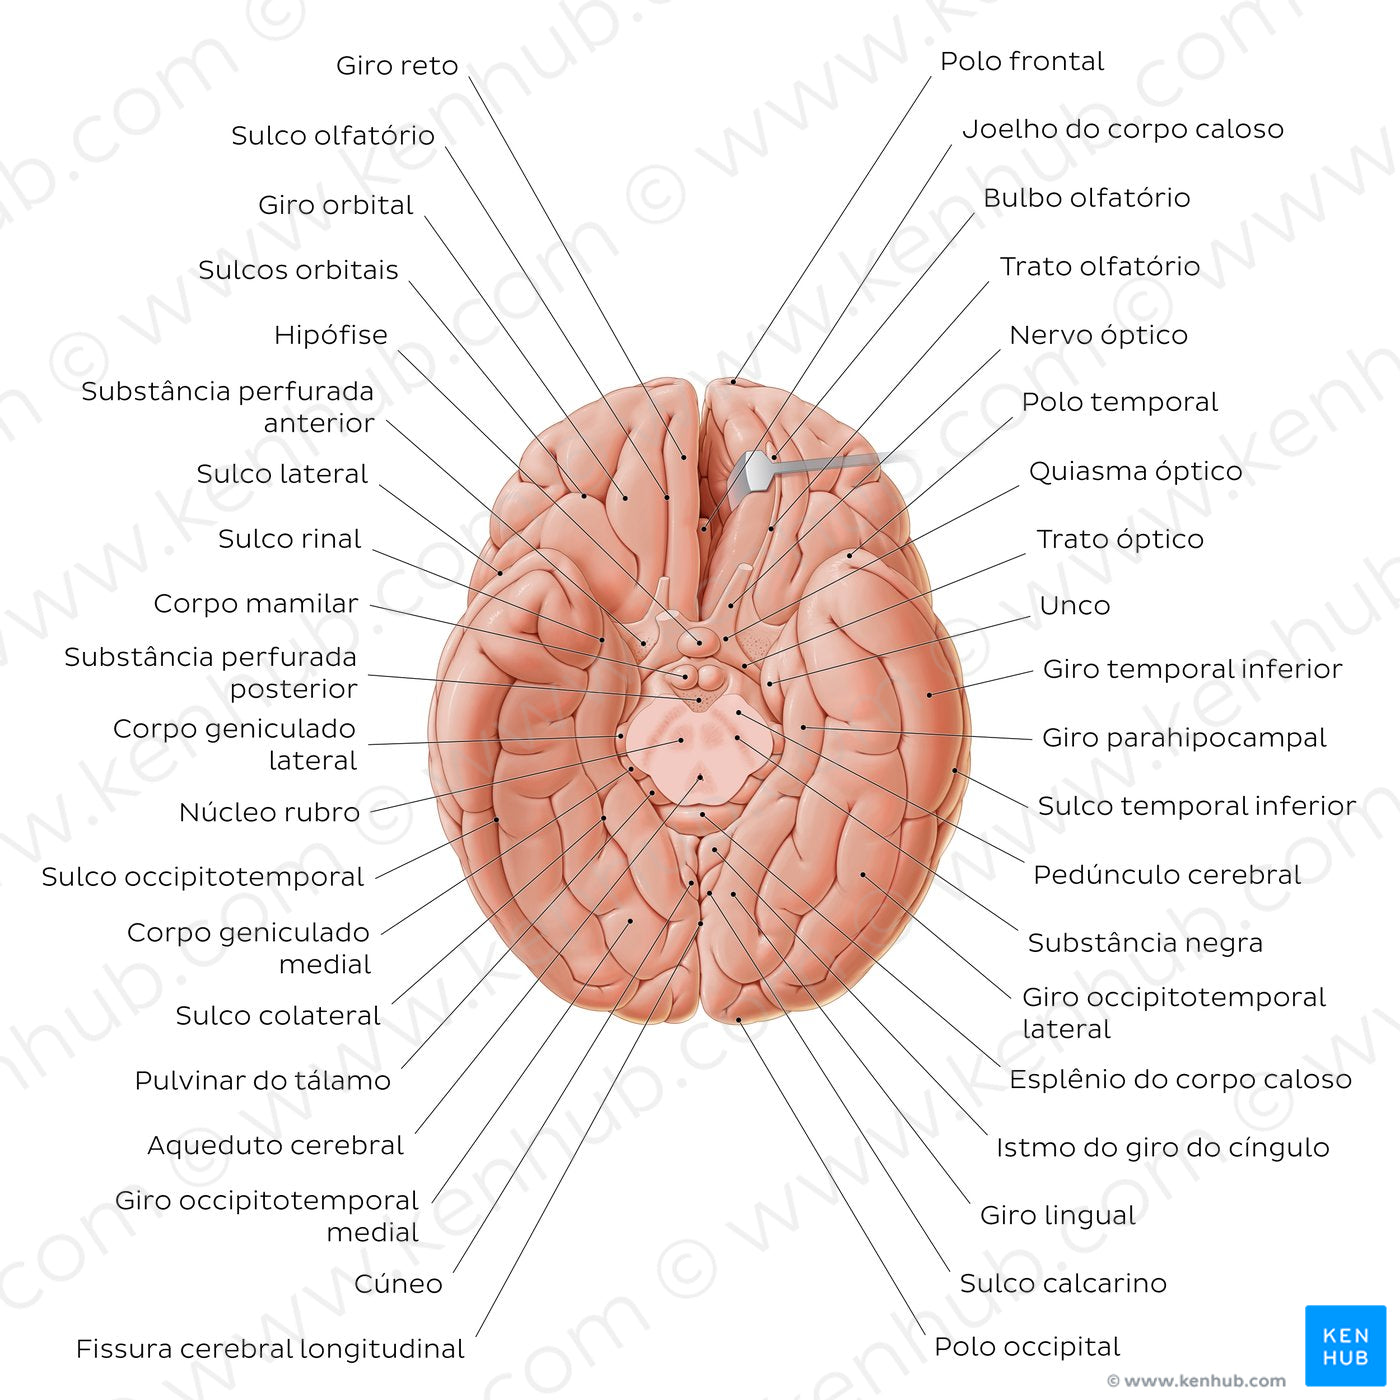 Basal view of the brain (Portuguese)